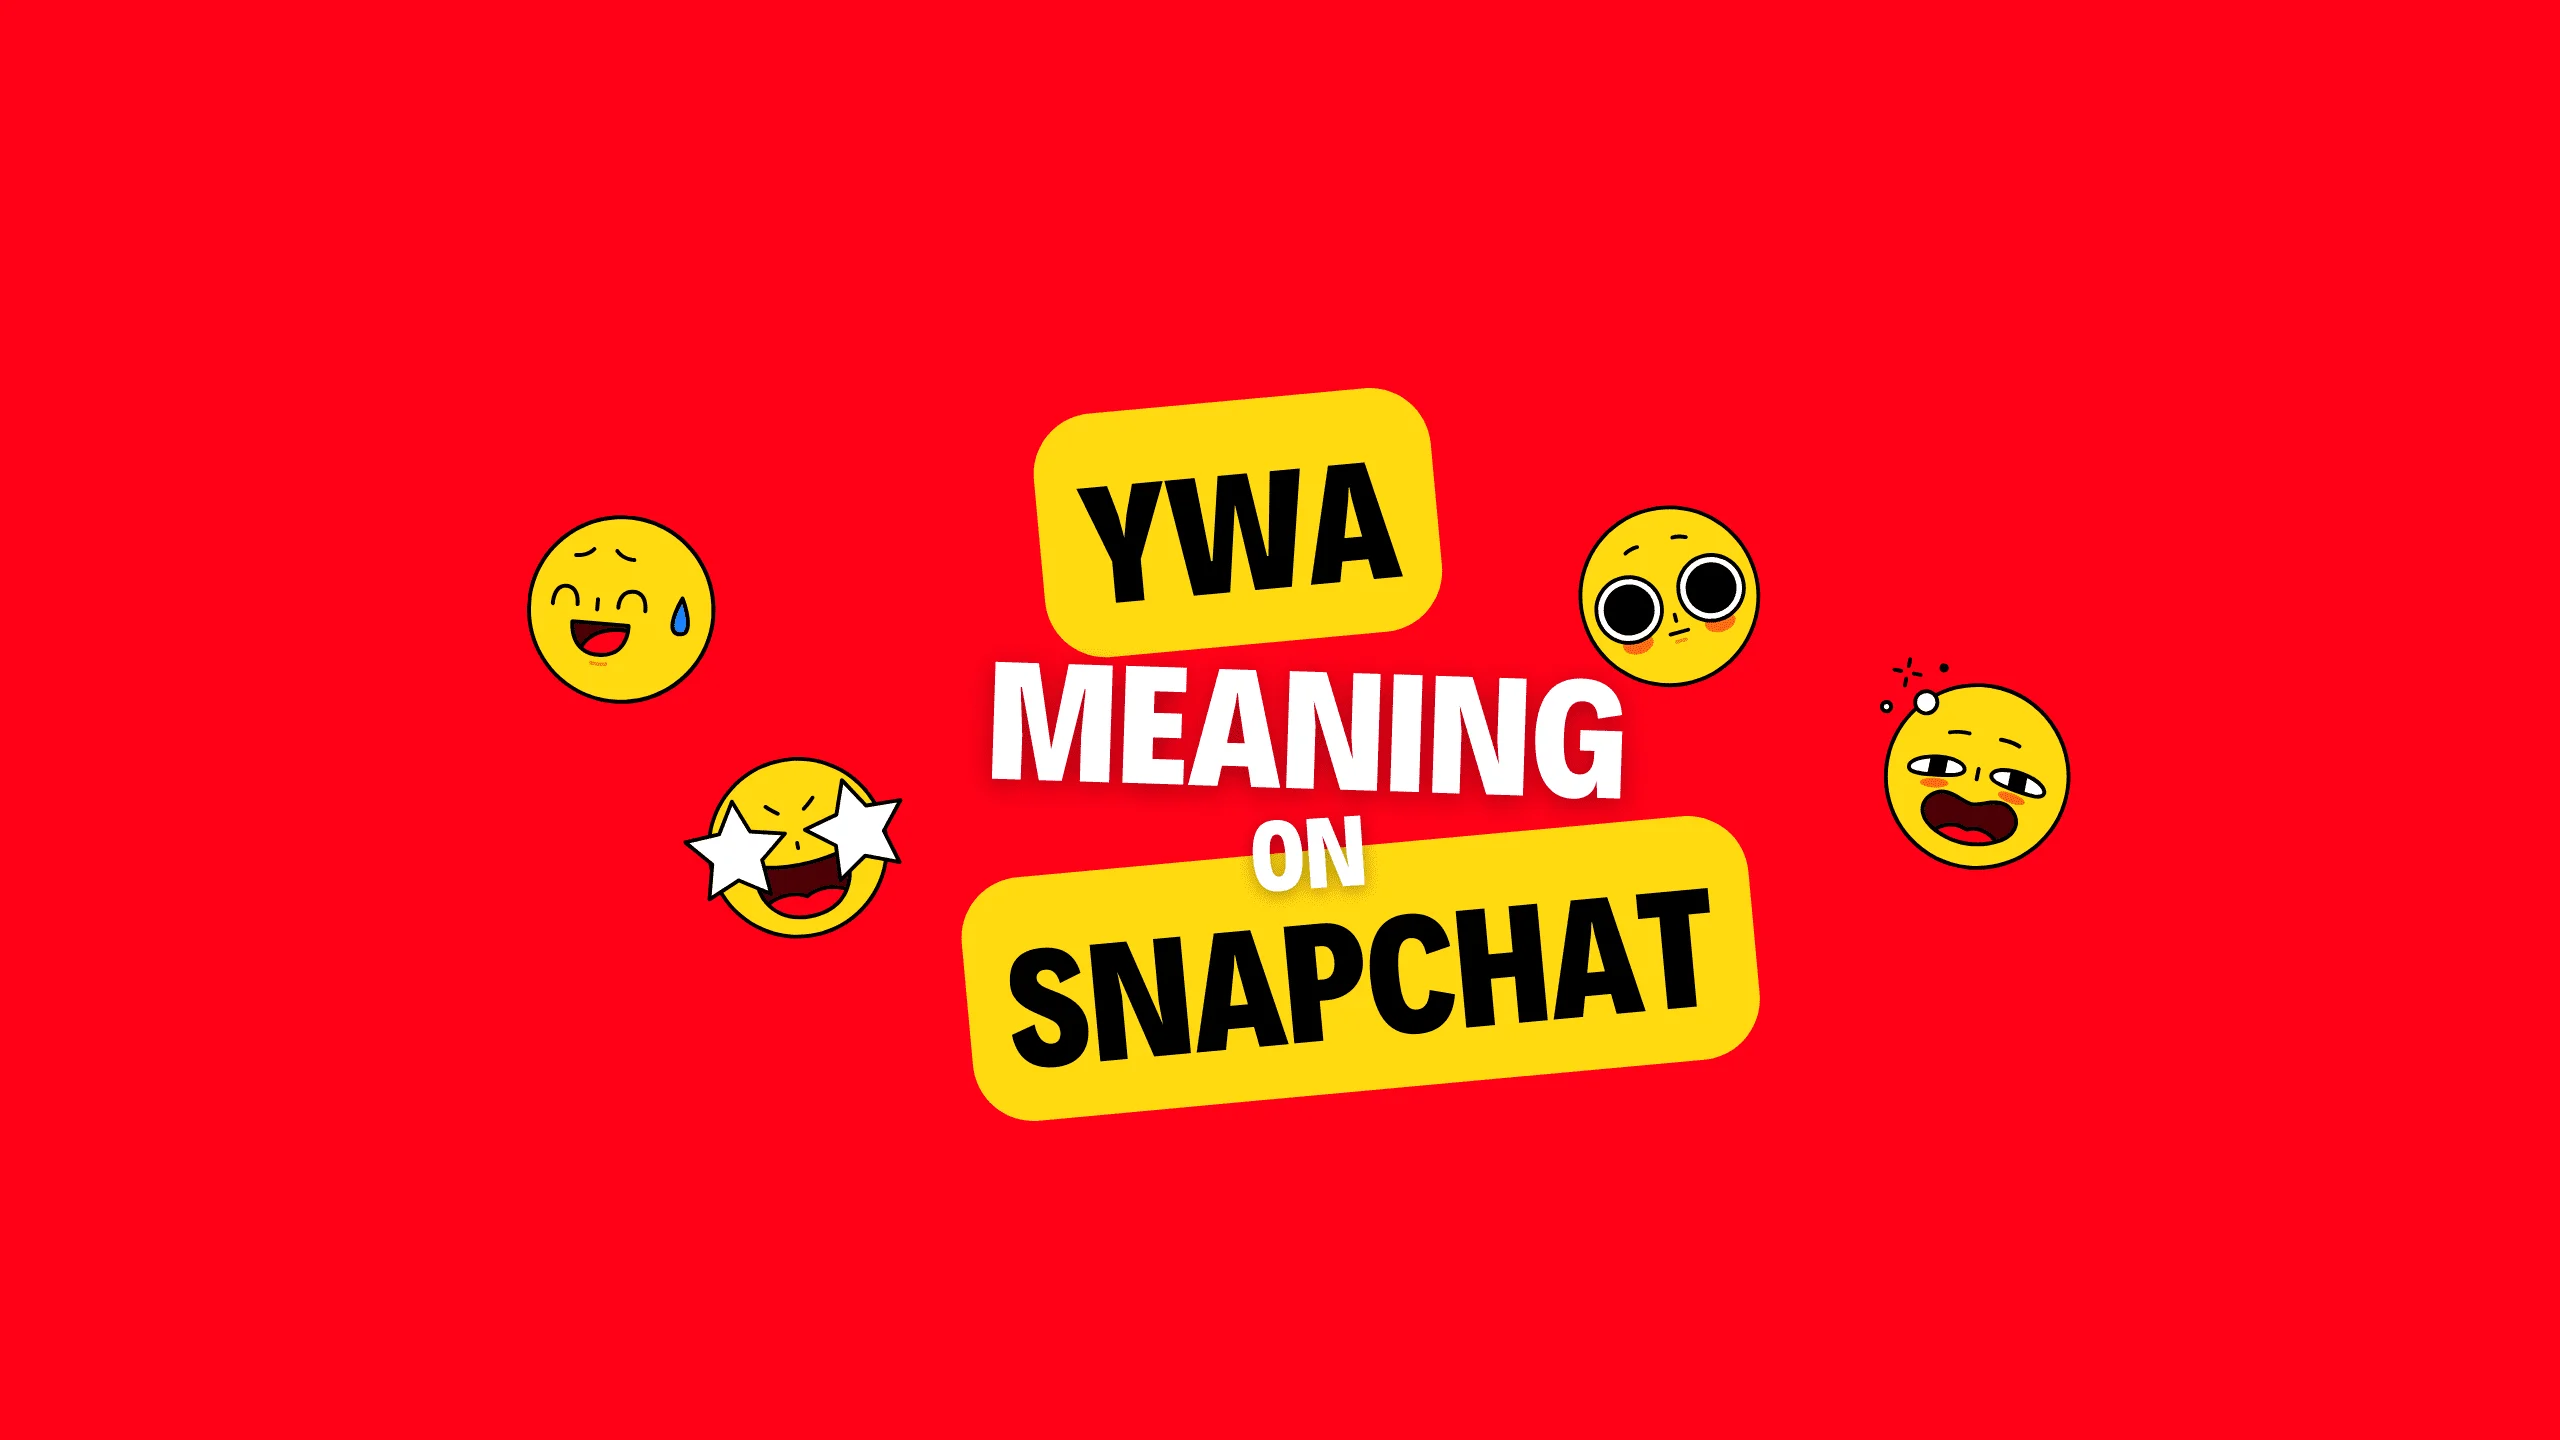 What Does YWA mean on Snapchat